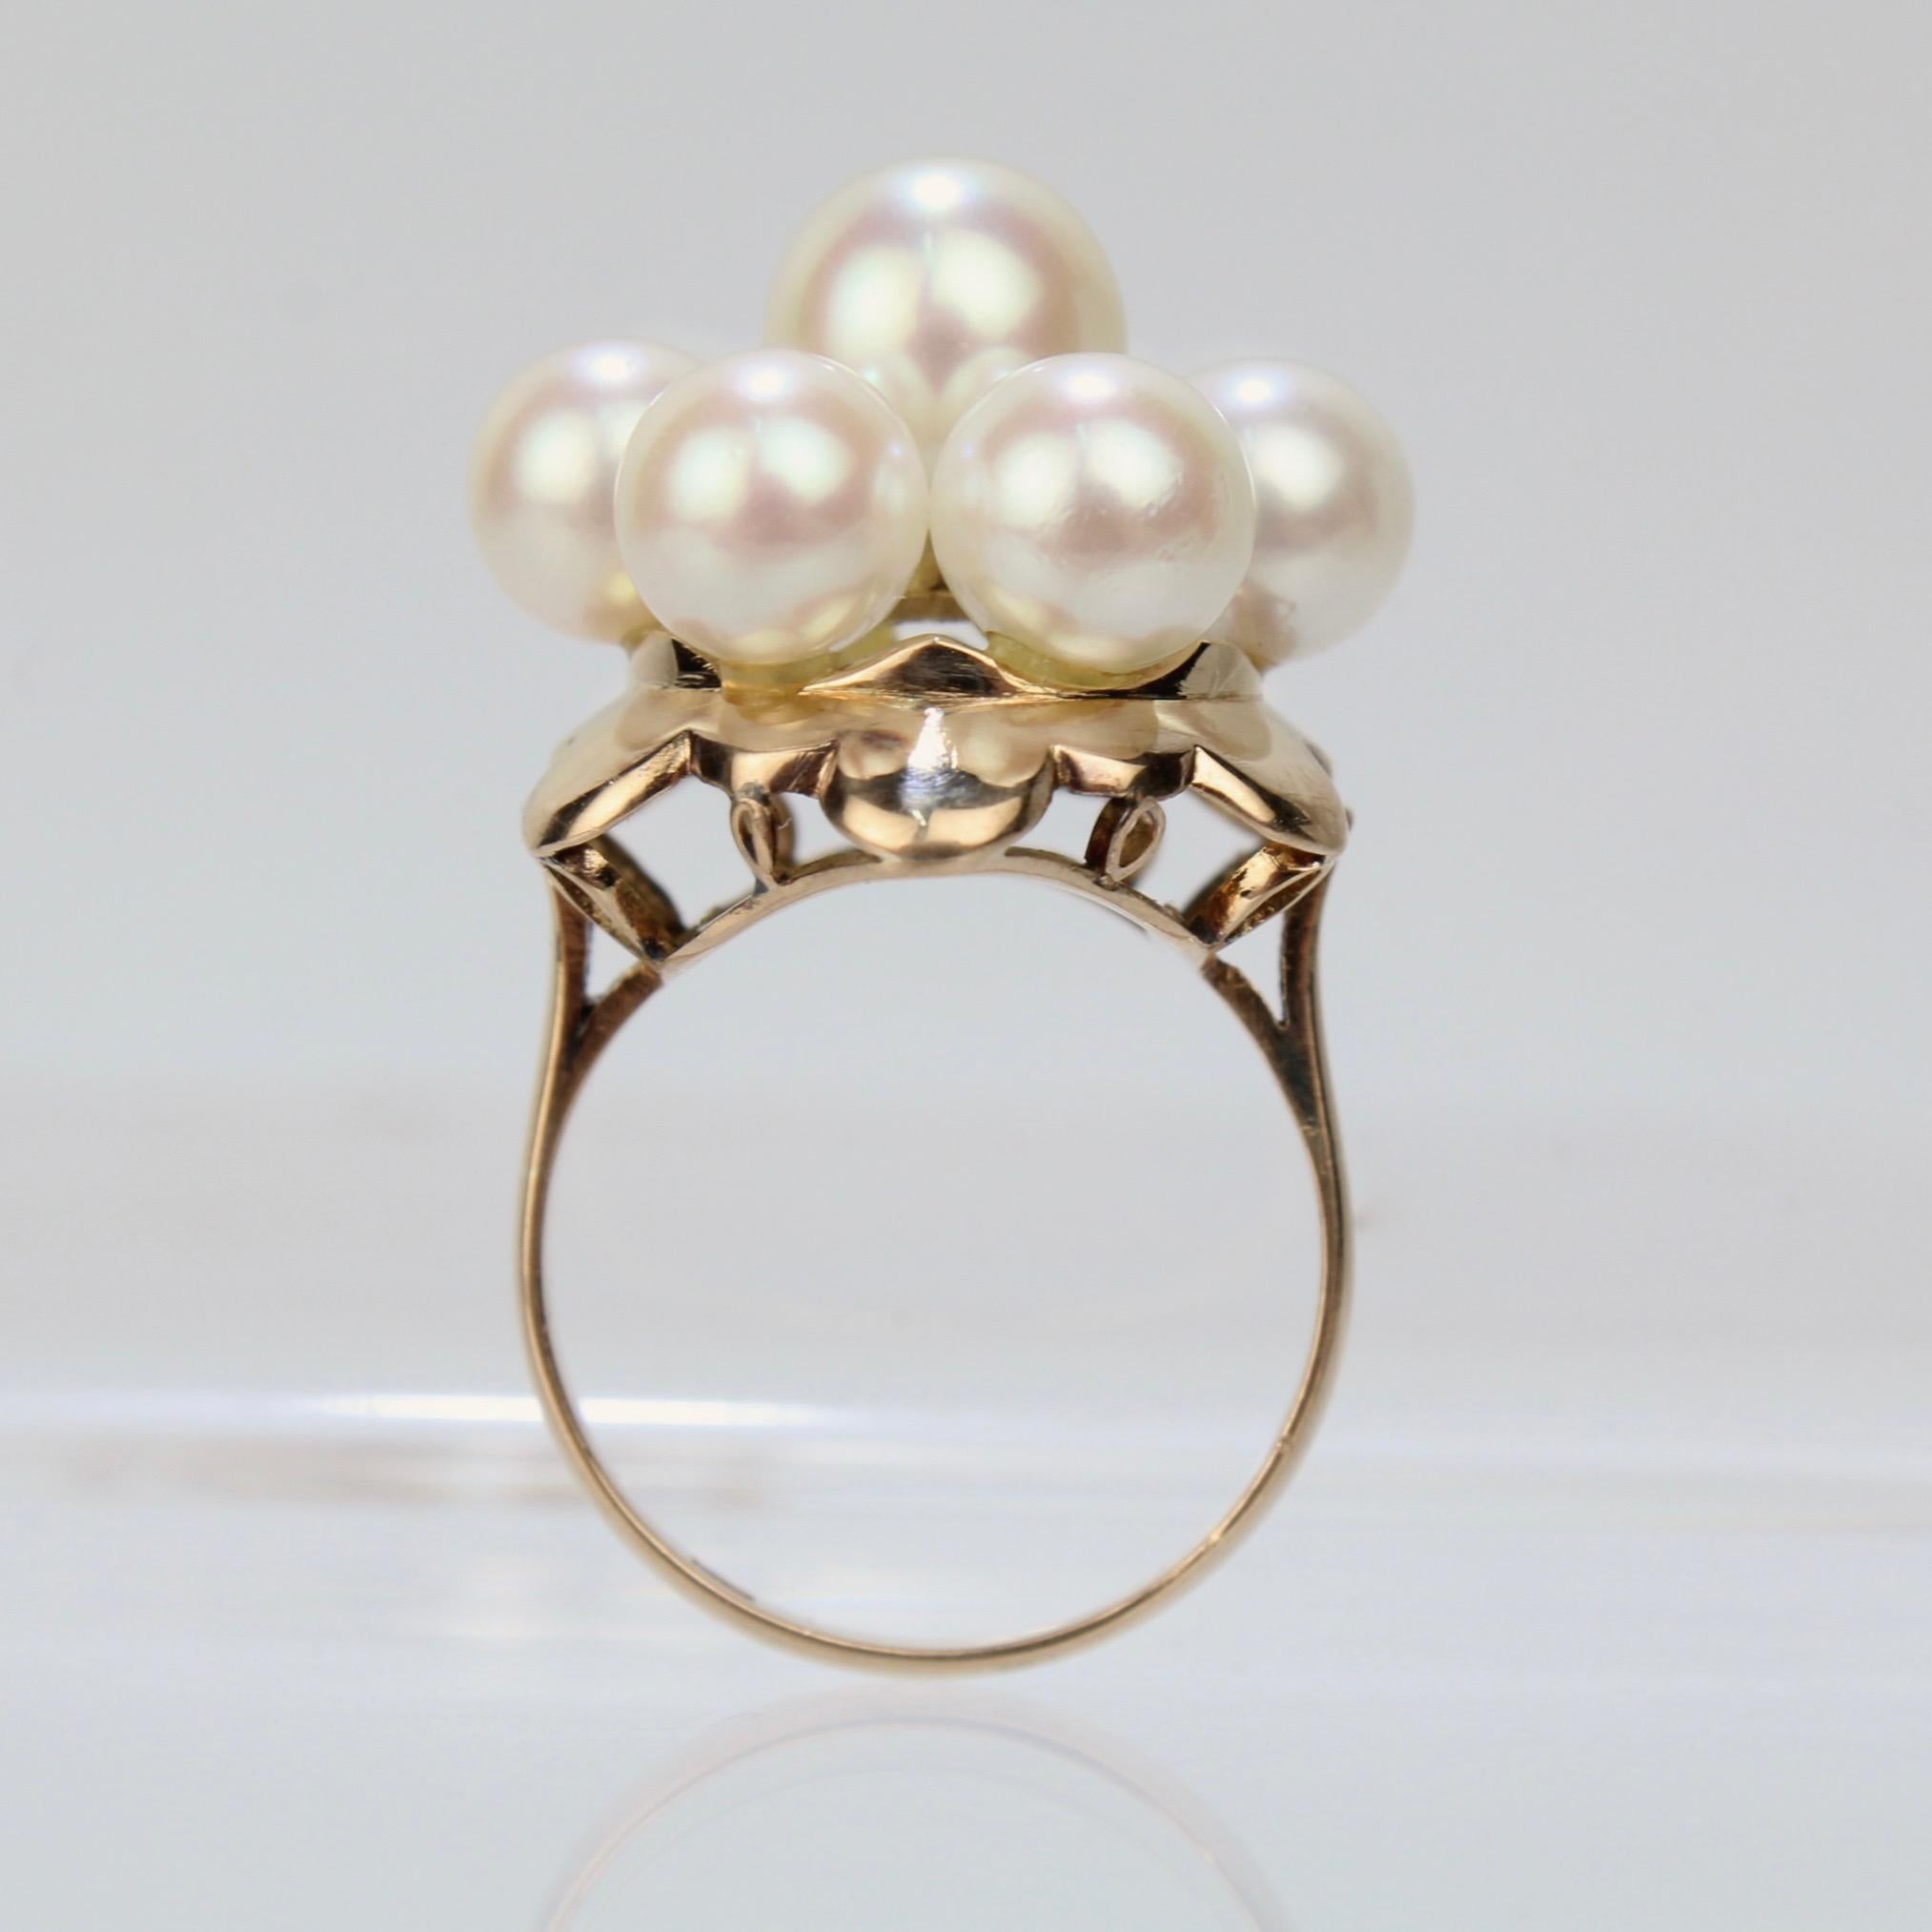 A fine gold and pearl cluster Mid-Century cocktail ring.

The ring has an 18k gold petal shaped setting that is supported by a gallery with open work and is set with fine round, white pearls. The largest pearl measures approximately 8 mm in